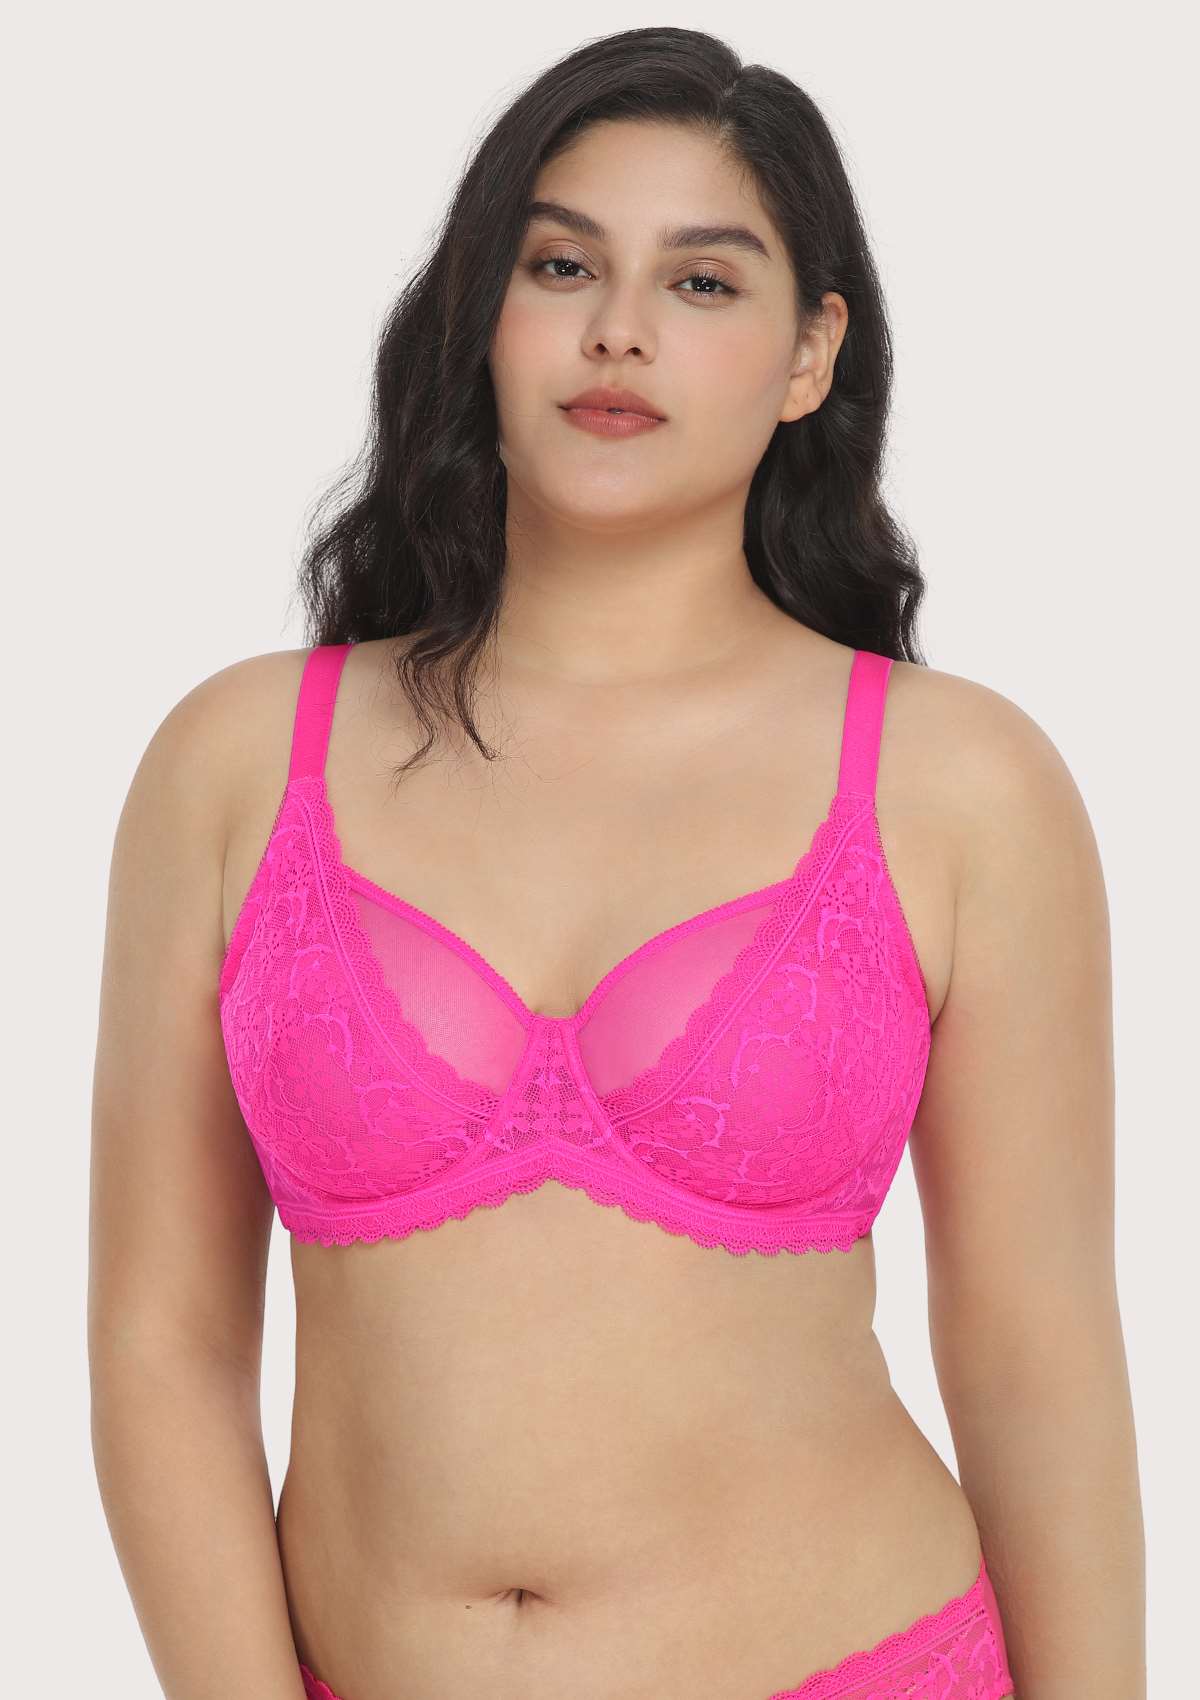 HSIA Anemone Lace Unlined Bra: Supportive, Lightweight Bra - Ginger / 42 / DD/E